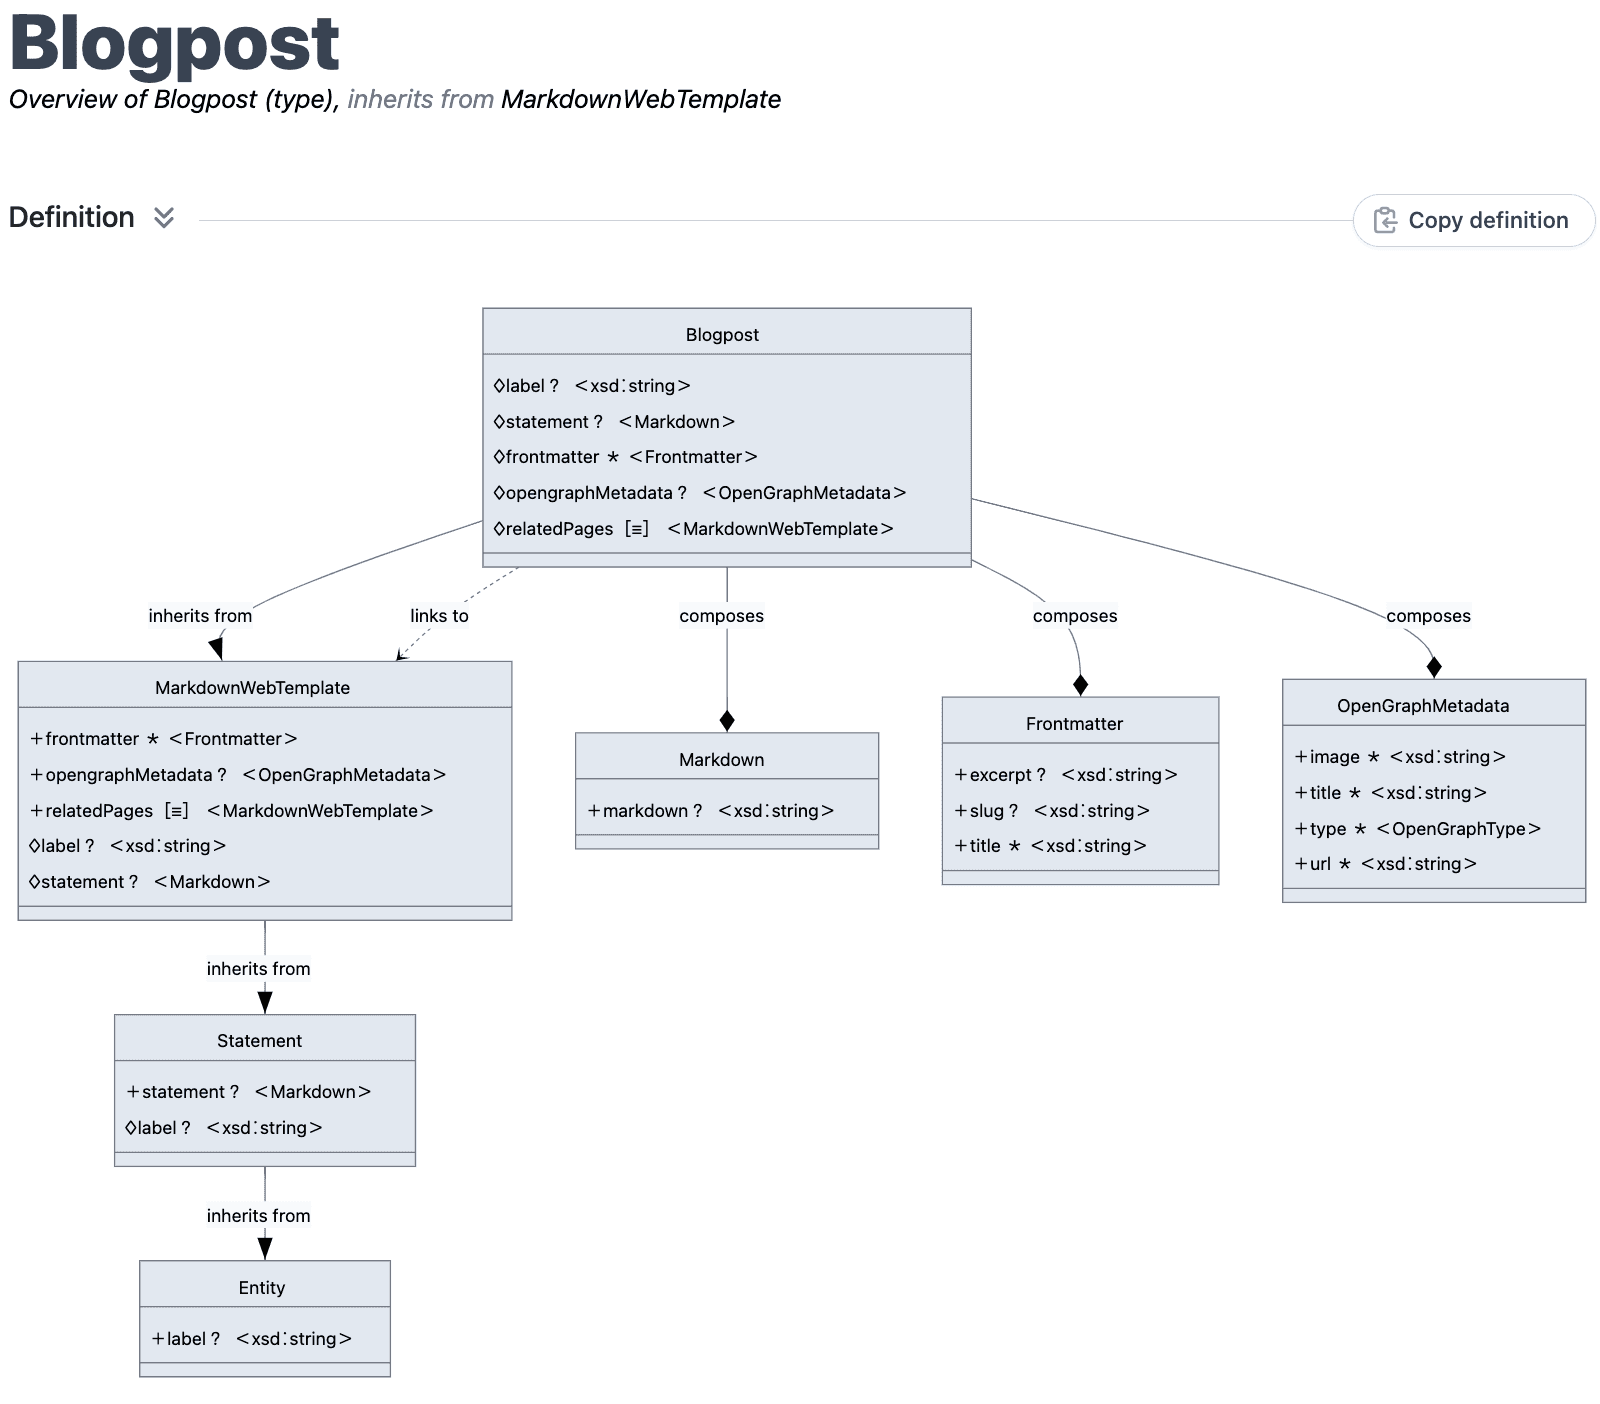 Screenshot of the type hierarchy for the blogpost schema